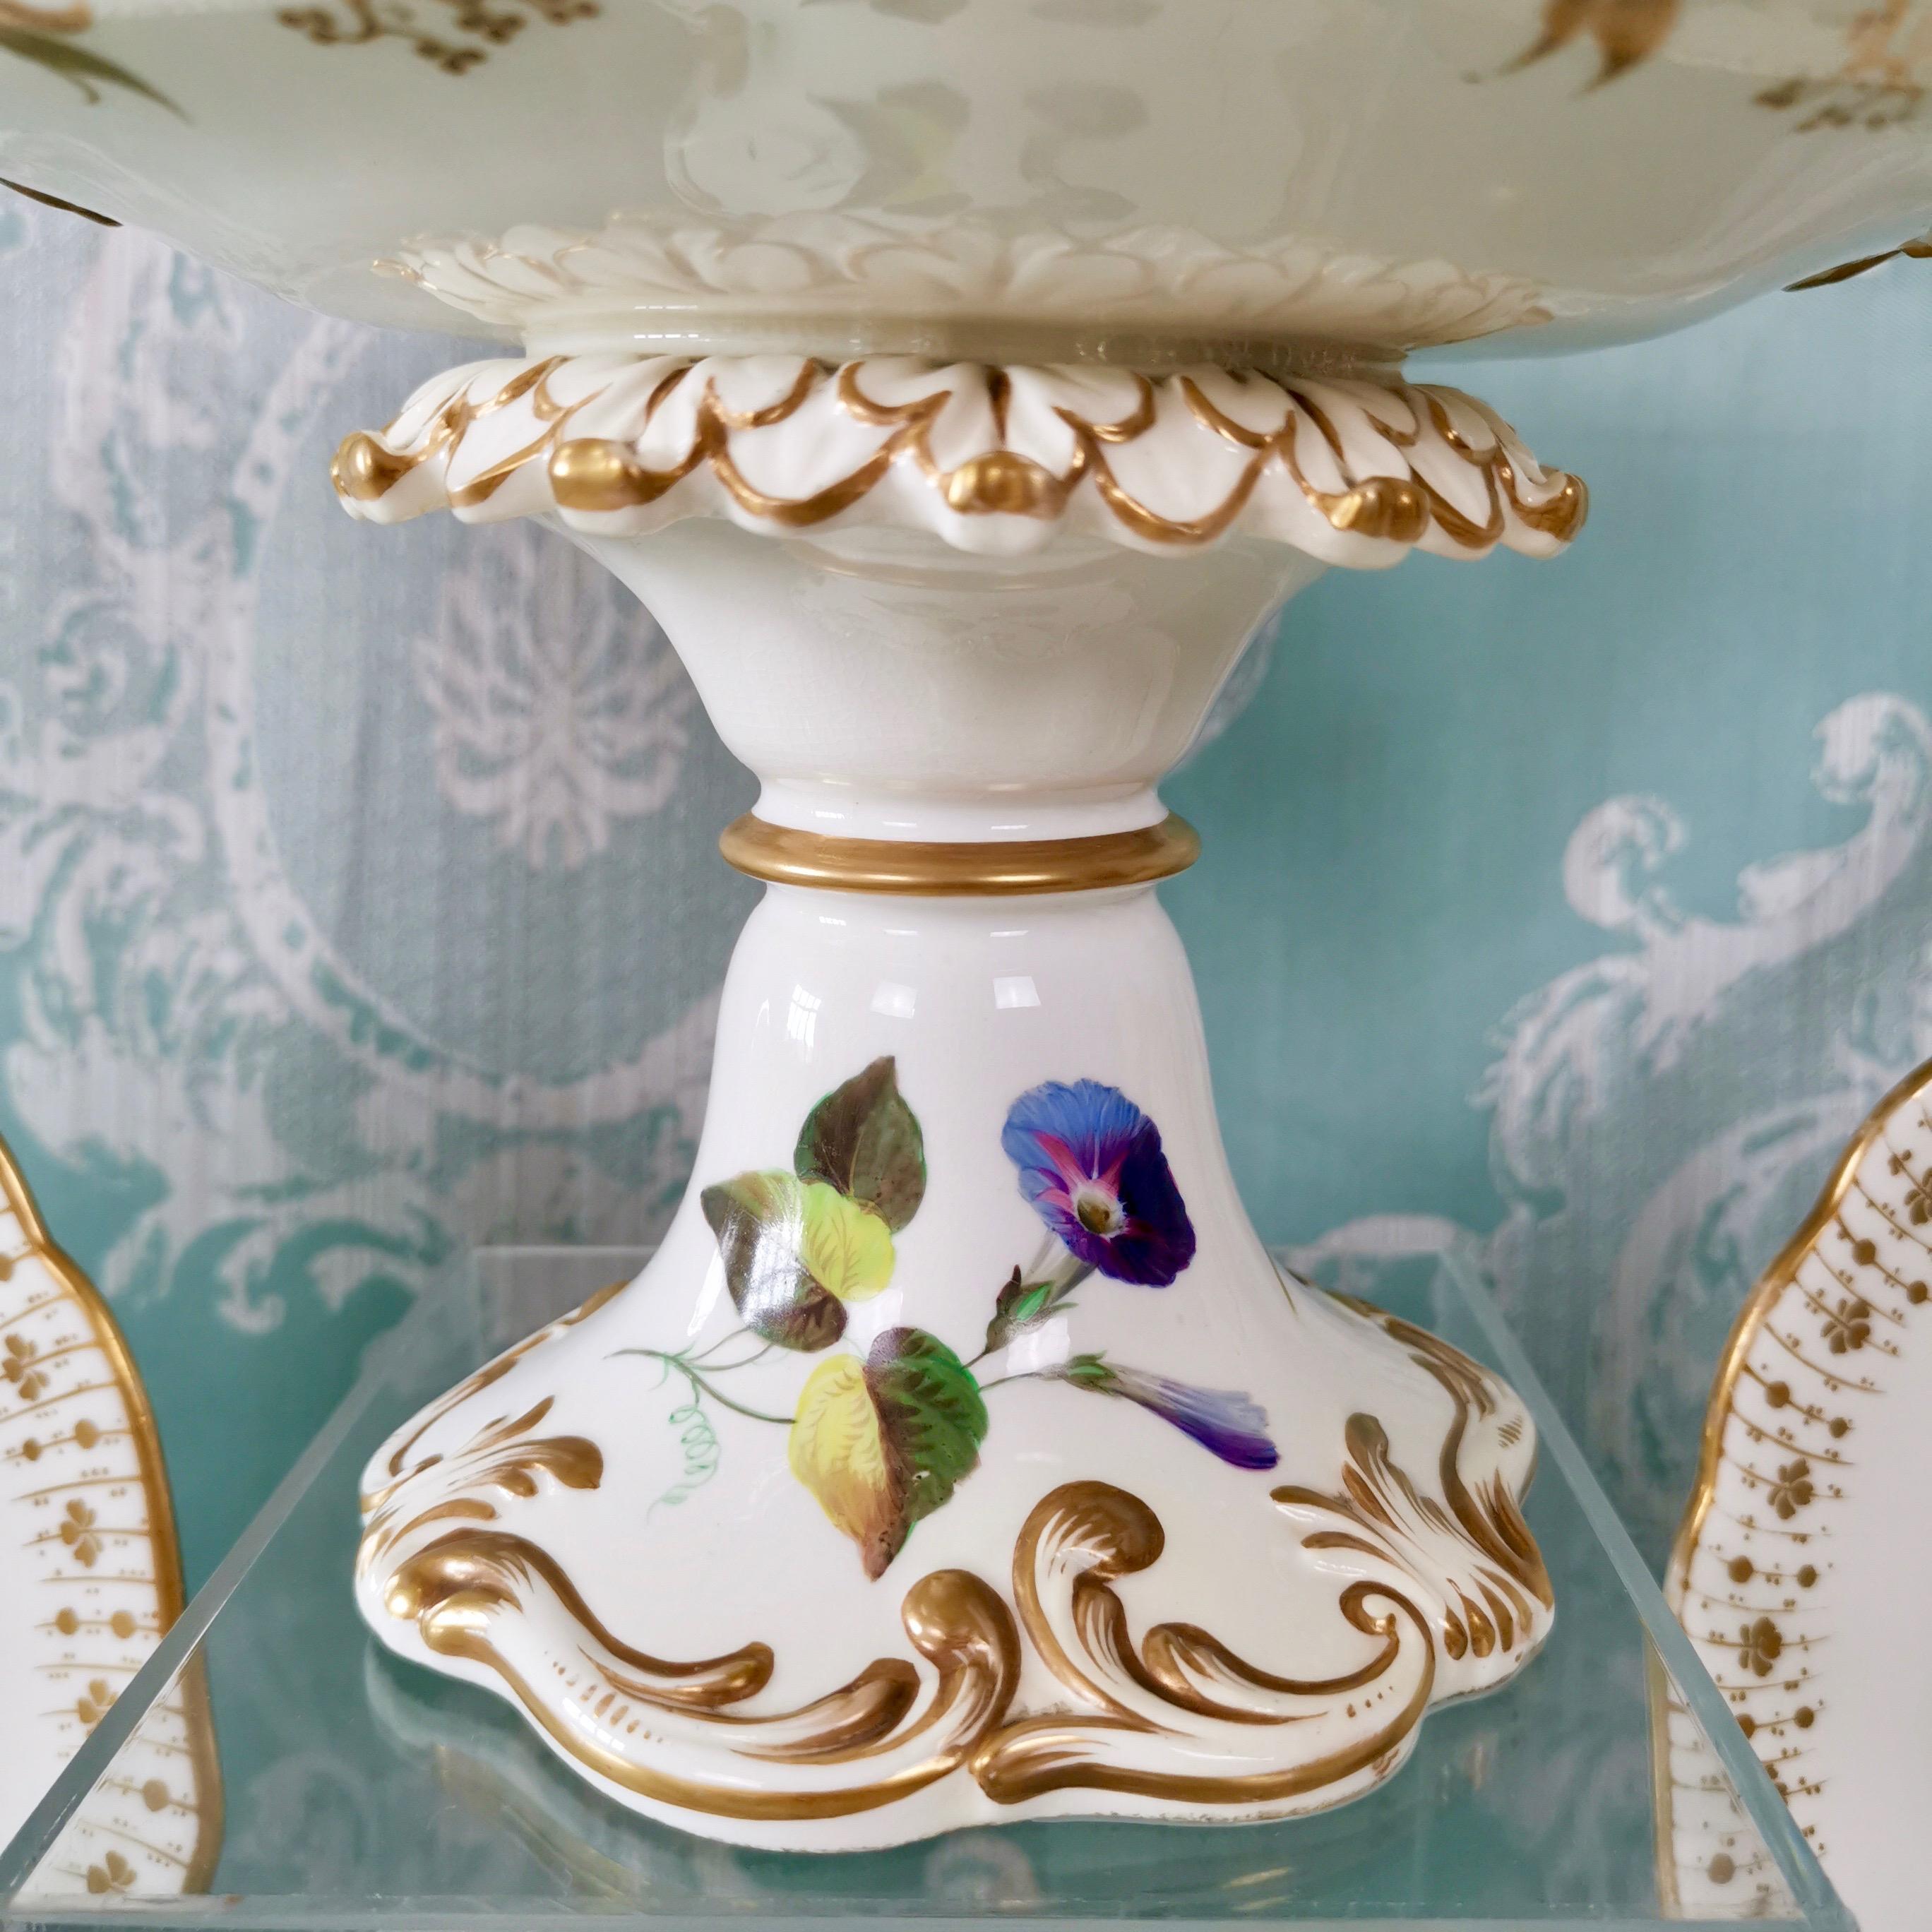 This is a stunning dessert service made by Coalport in circa 1820. It was hand painted with beautiful flower studies by Cecil Jones, a celebrated flower painter who was born in 1799 and worked for Coalport between circa 1815 and 1845.

The service